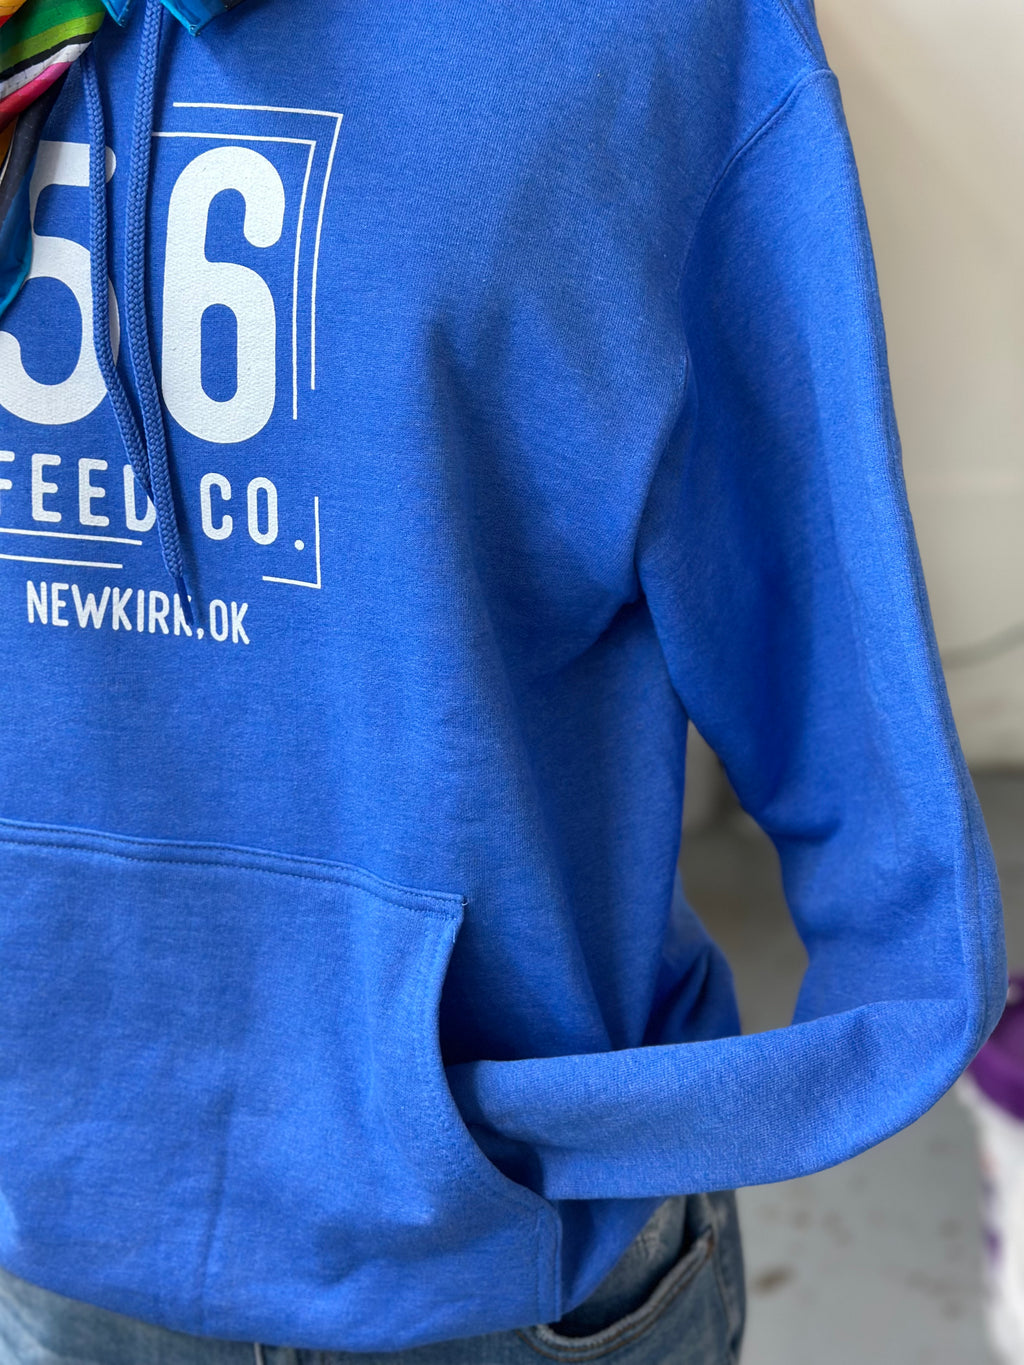 56 Feed Co l Adult Heather Royal Fleece Pullover Hoody